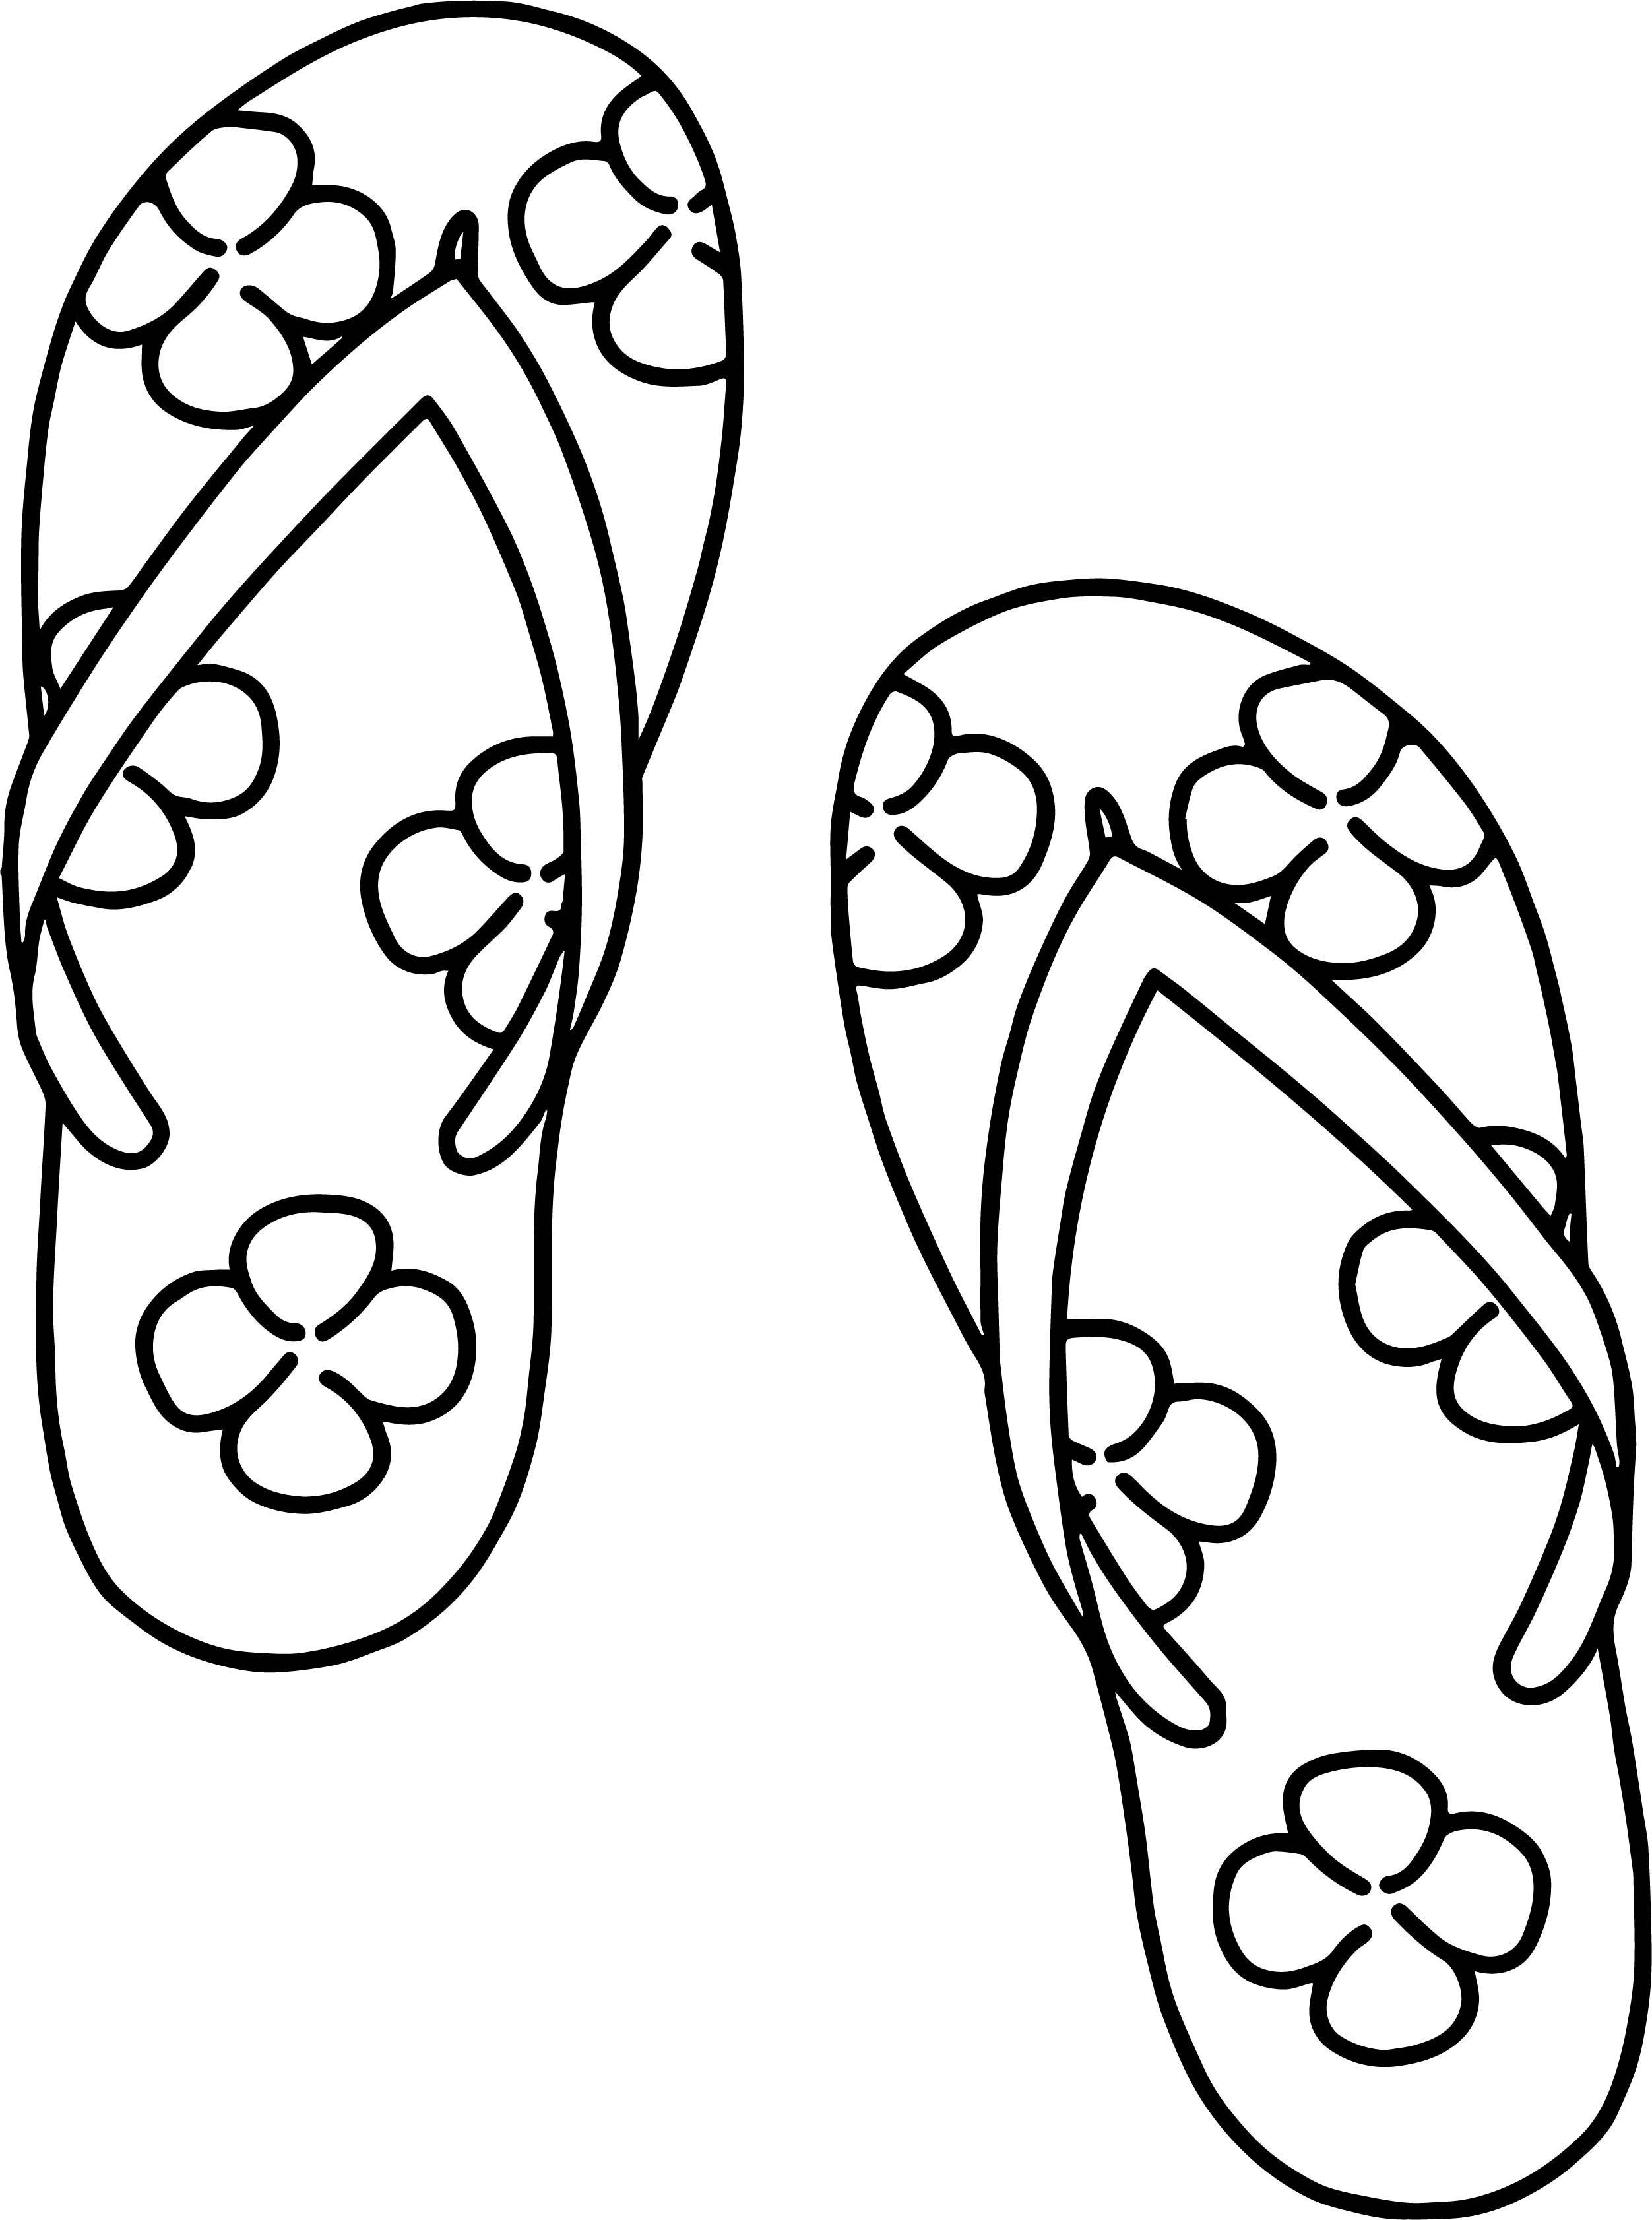 Summer Shoes in Julys Coloring Page